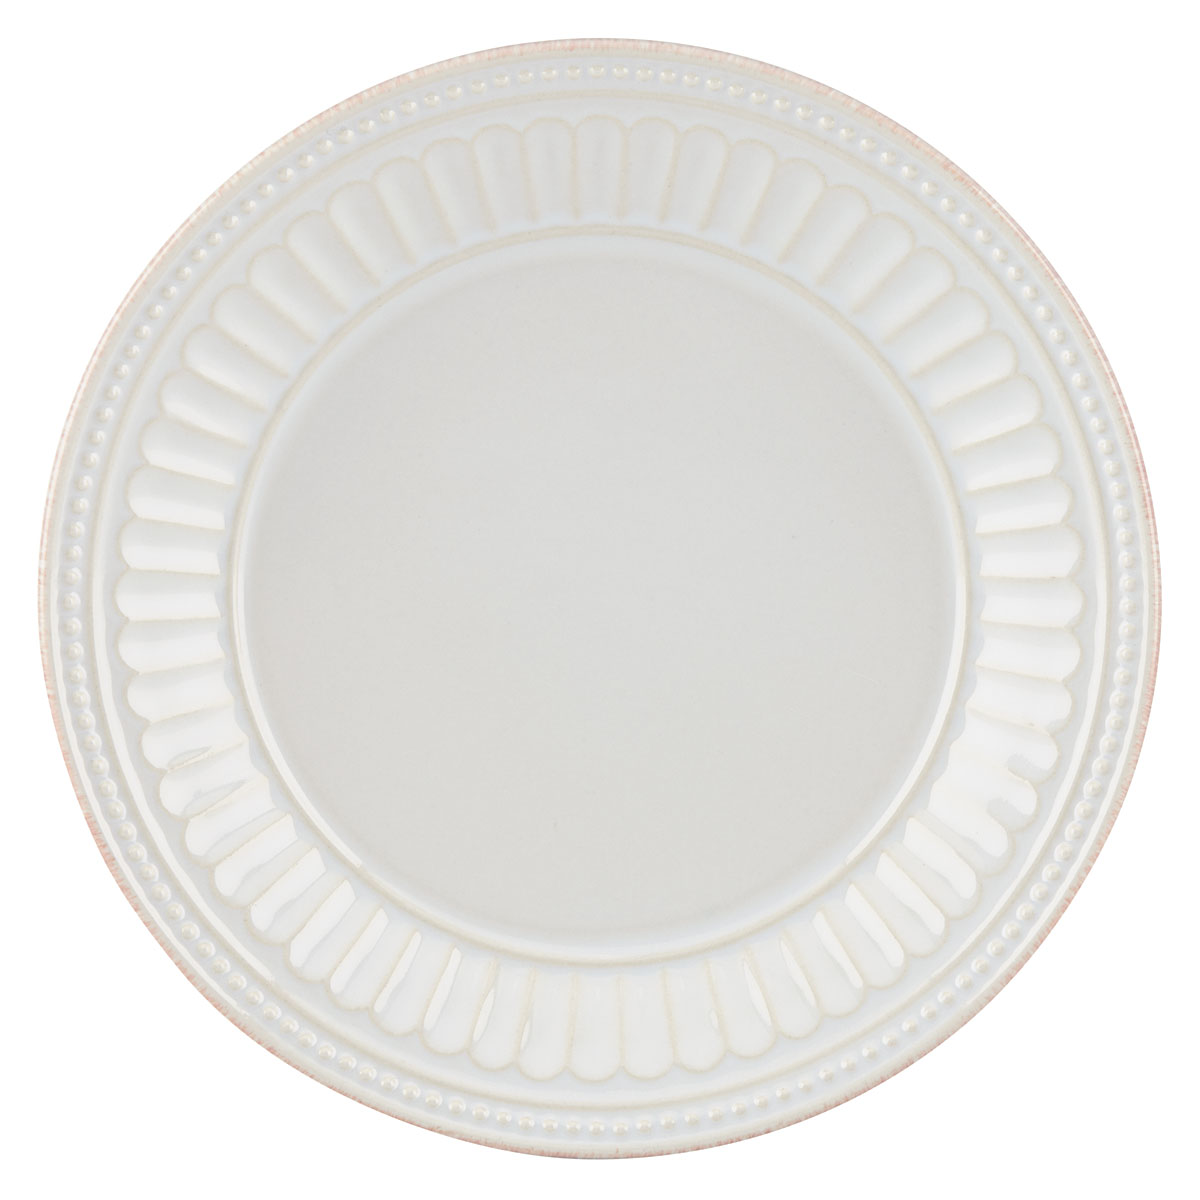 Lenox French Perle Groove White China Dessert Plate, Single